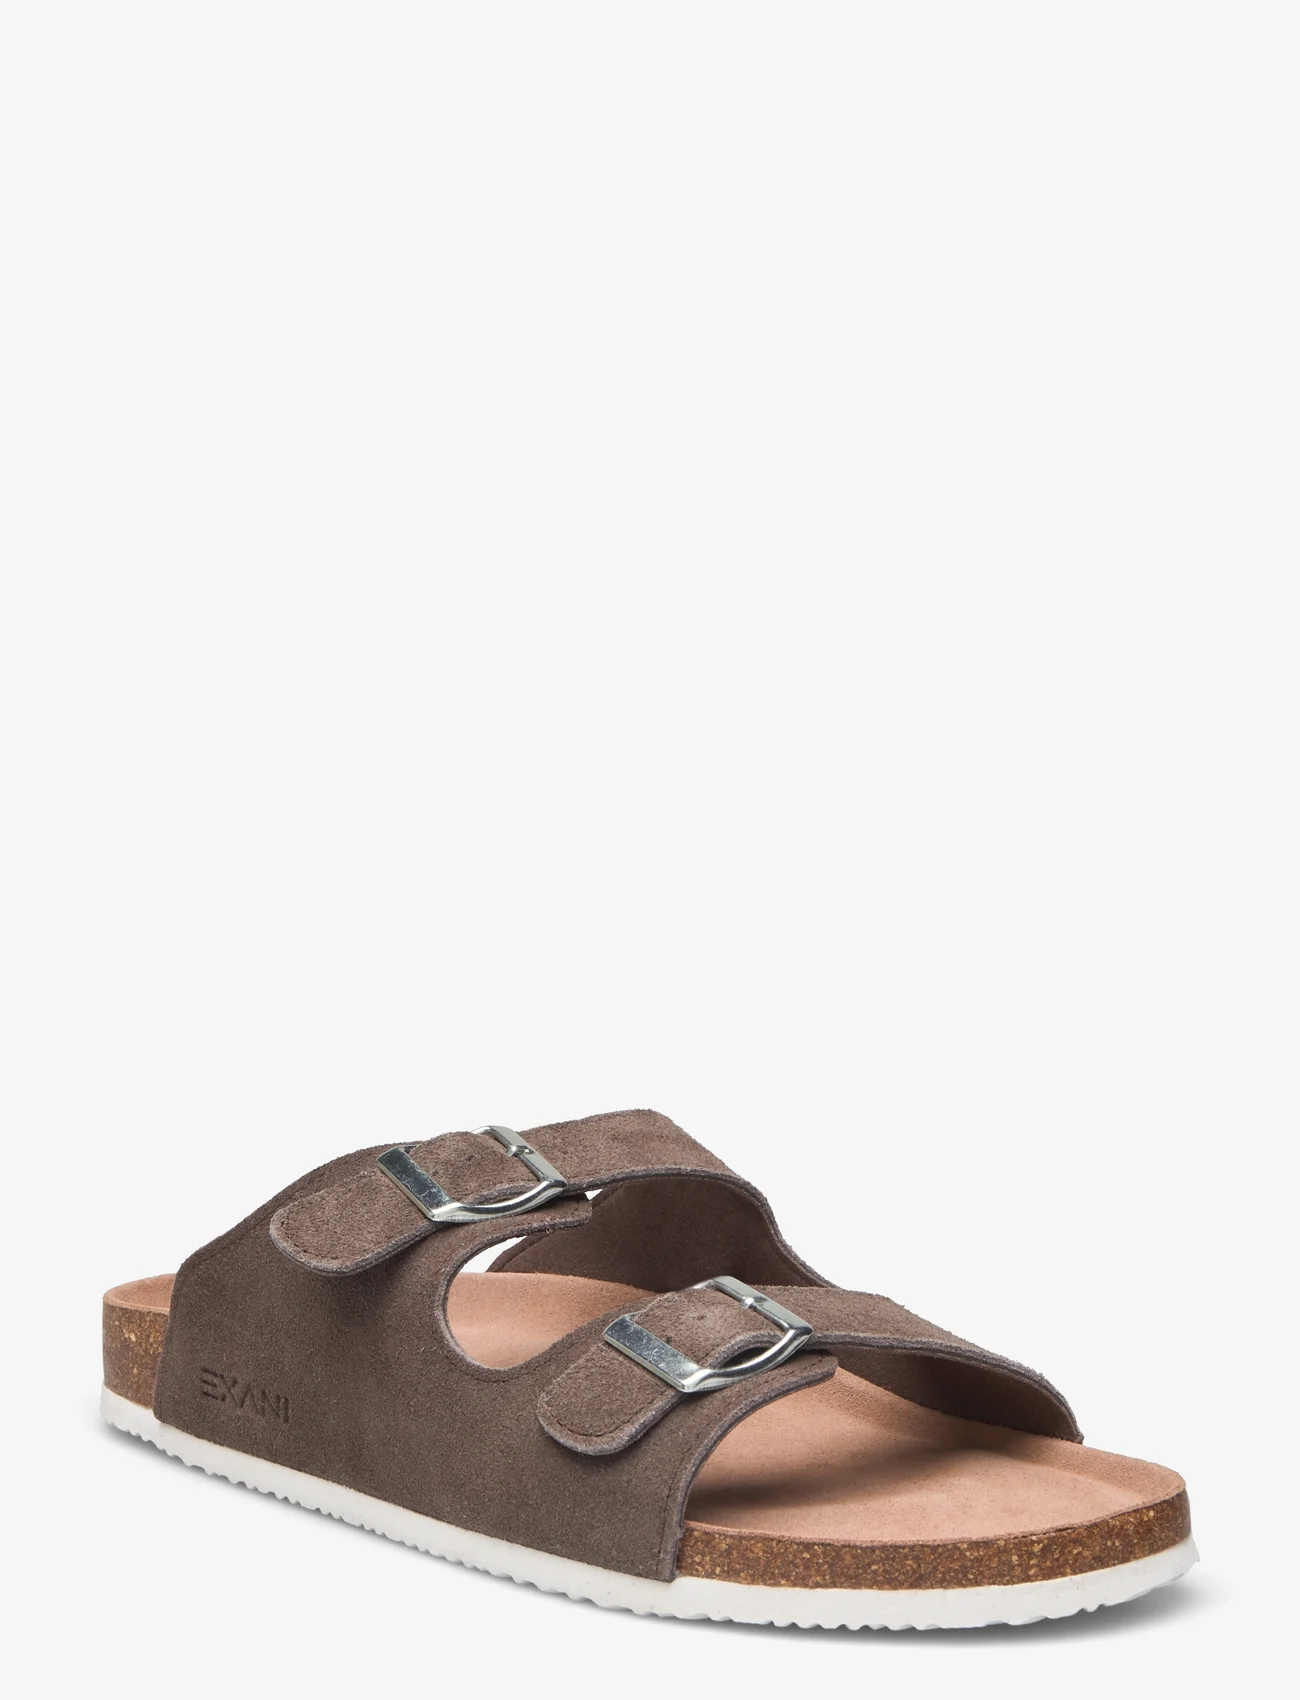 Exani - SPECTRA SUEDE M - sandals - brown - 0